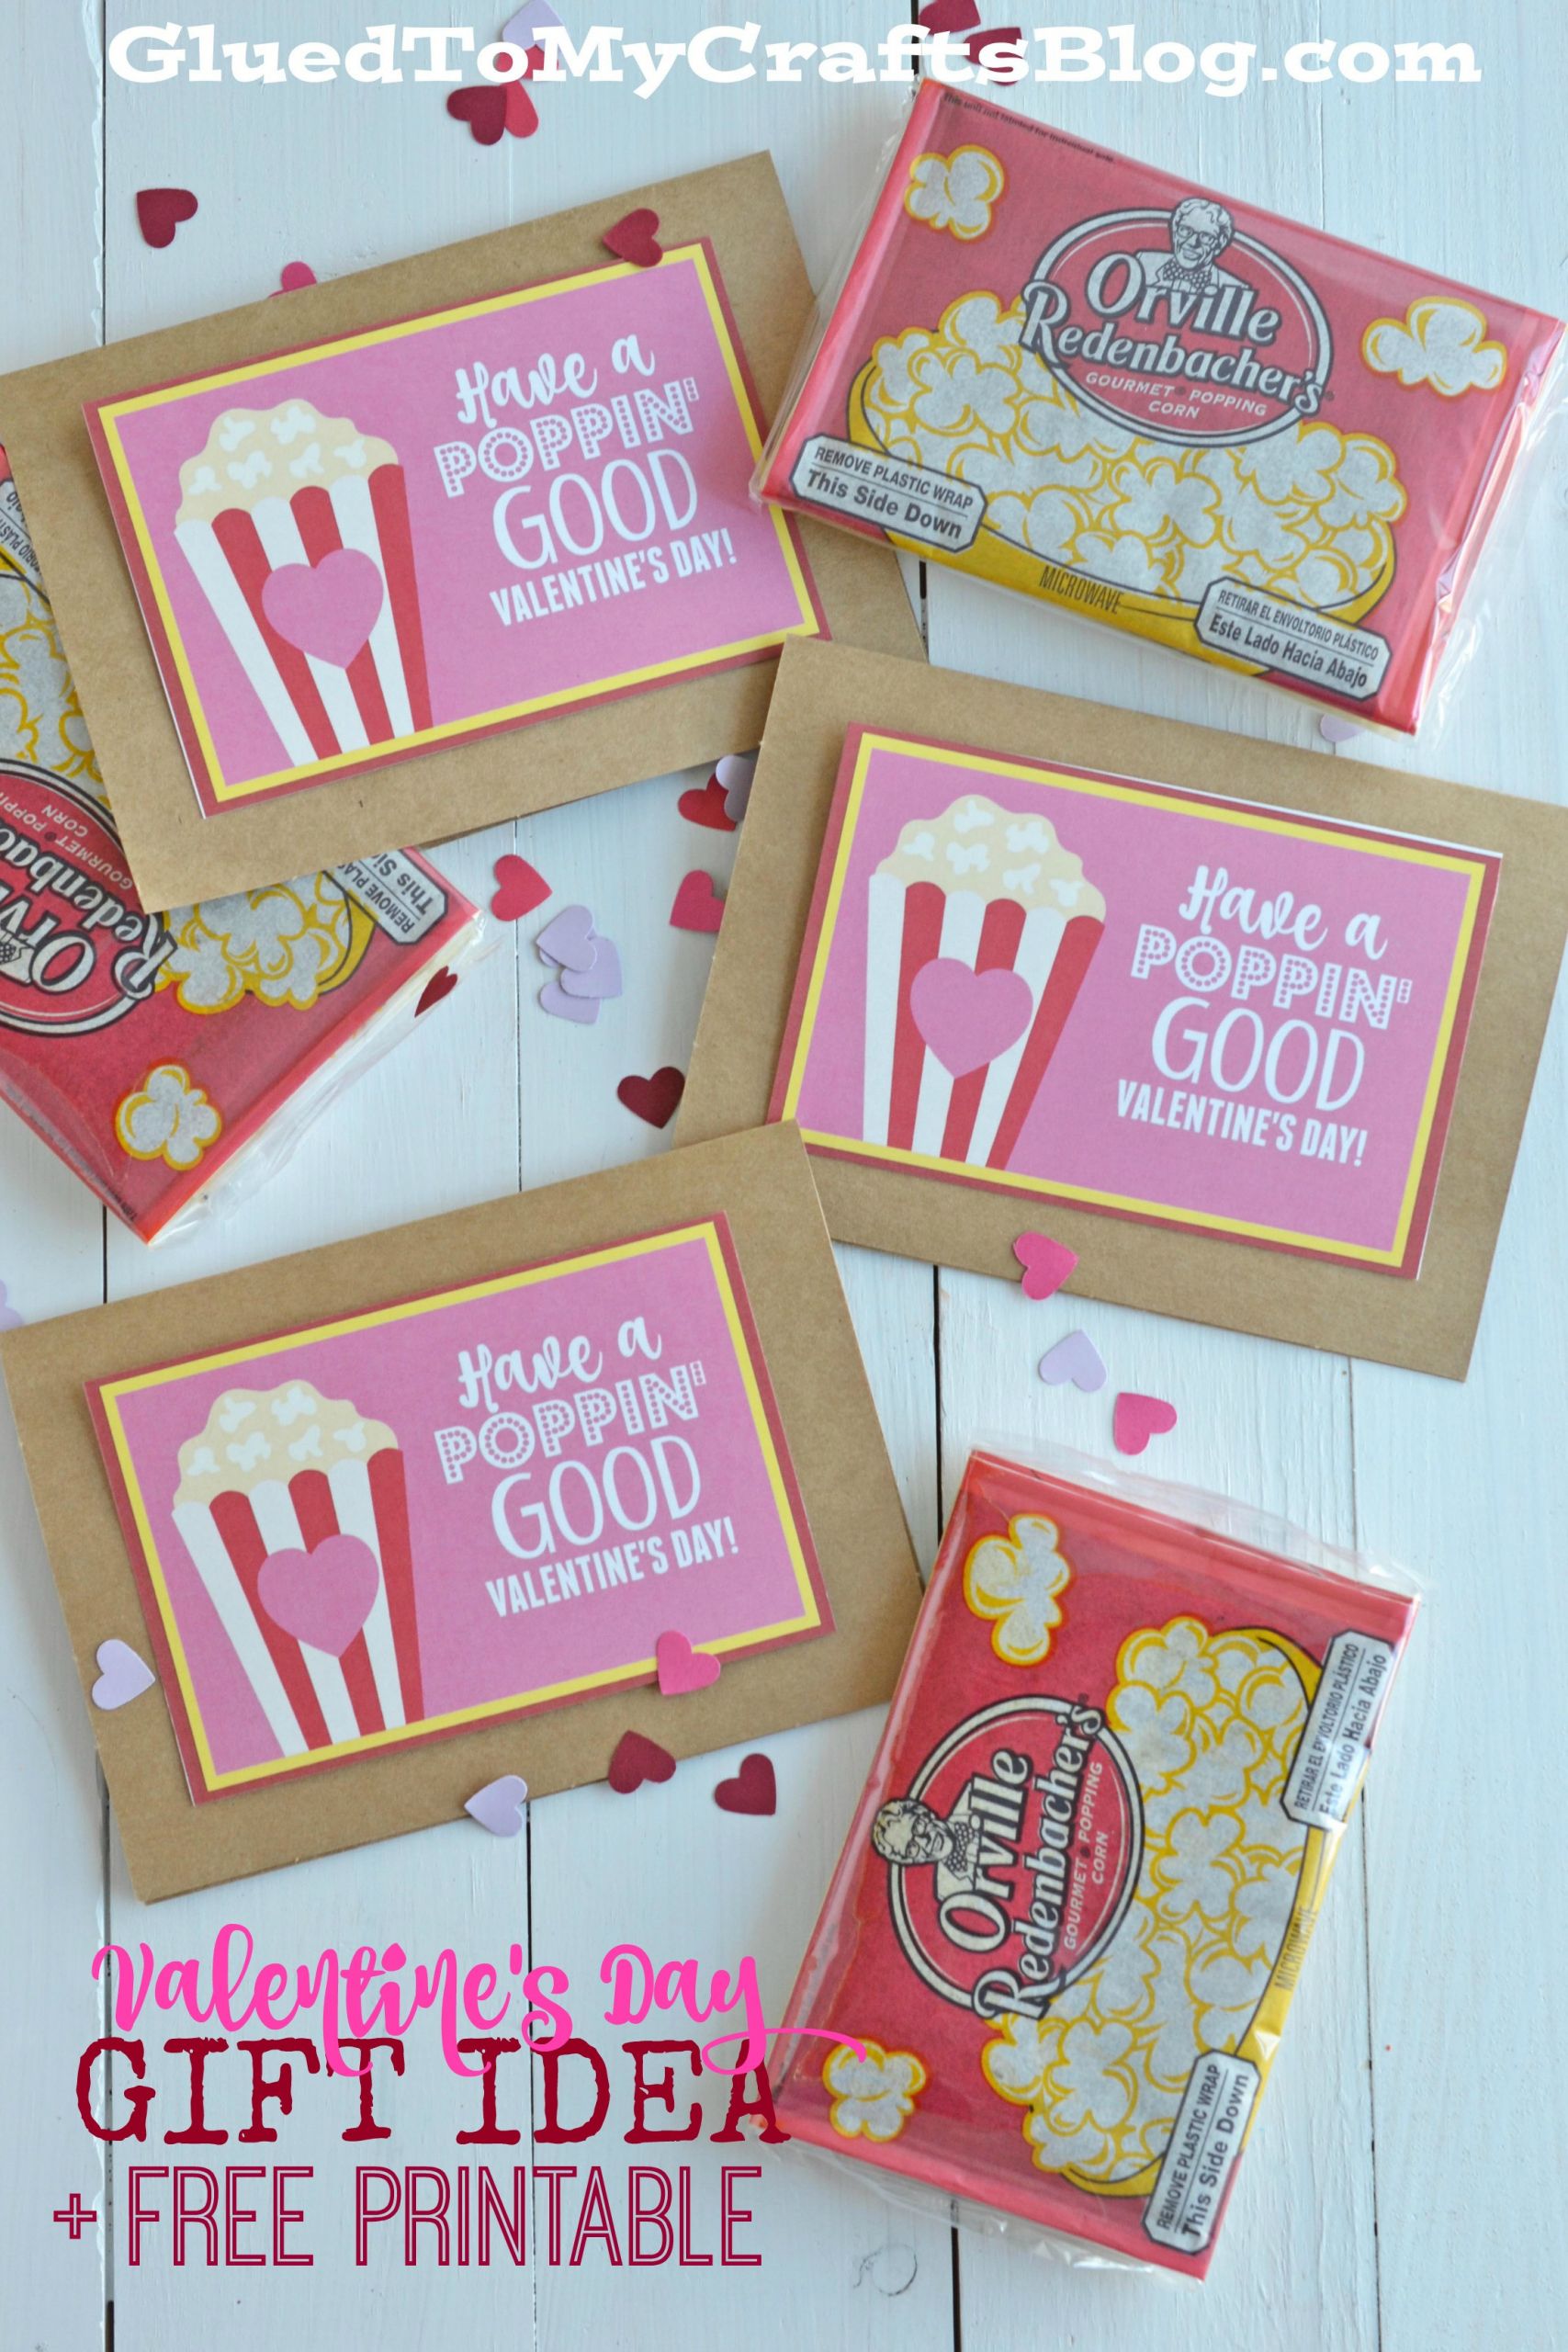 Good Ideas For Valentines Day
 Poppin Good Valentine s Day Gift Idea w free printable